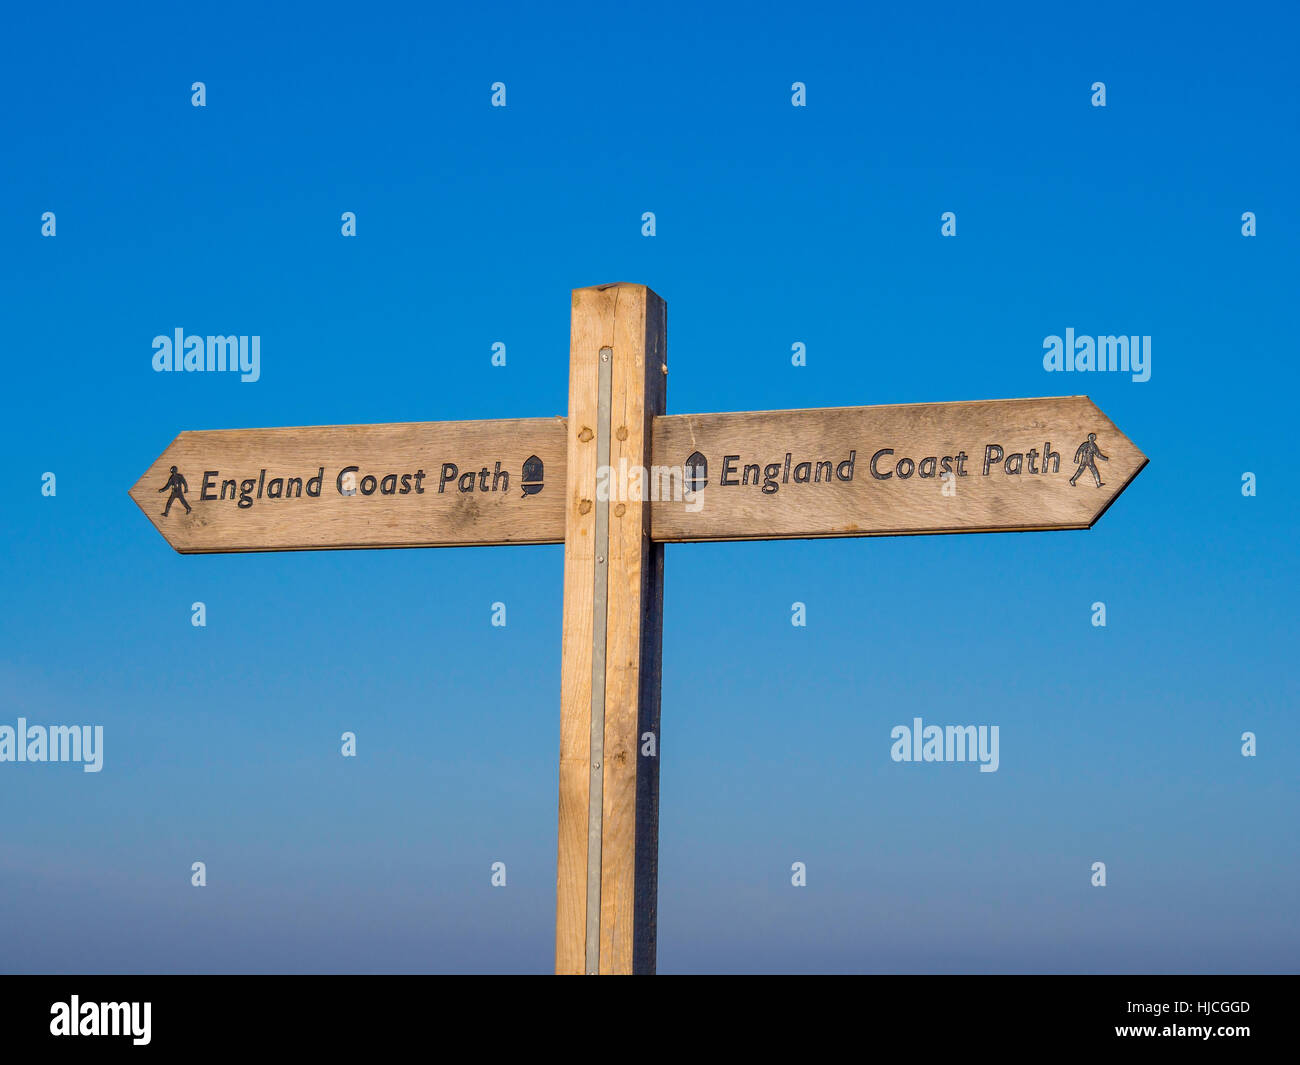 A wooden finger post for the England Coast Path National Trail Stock Photo